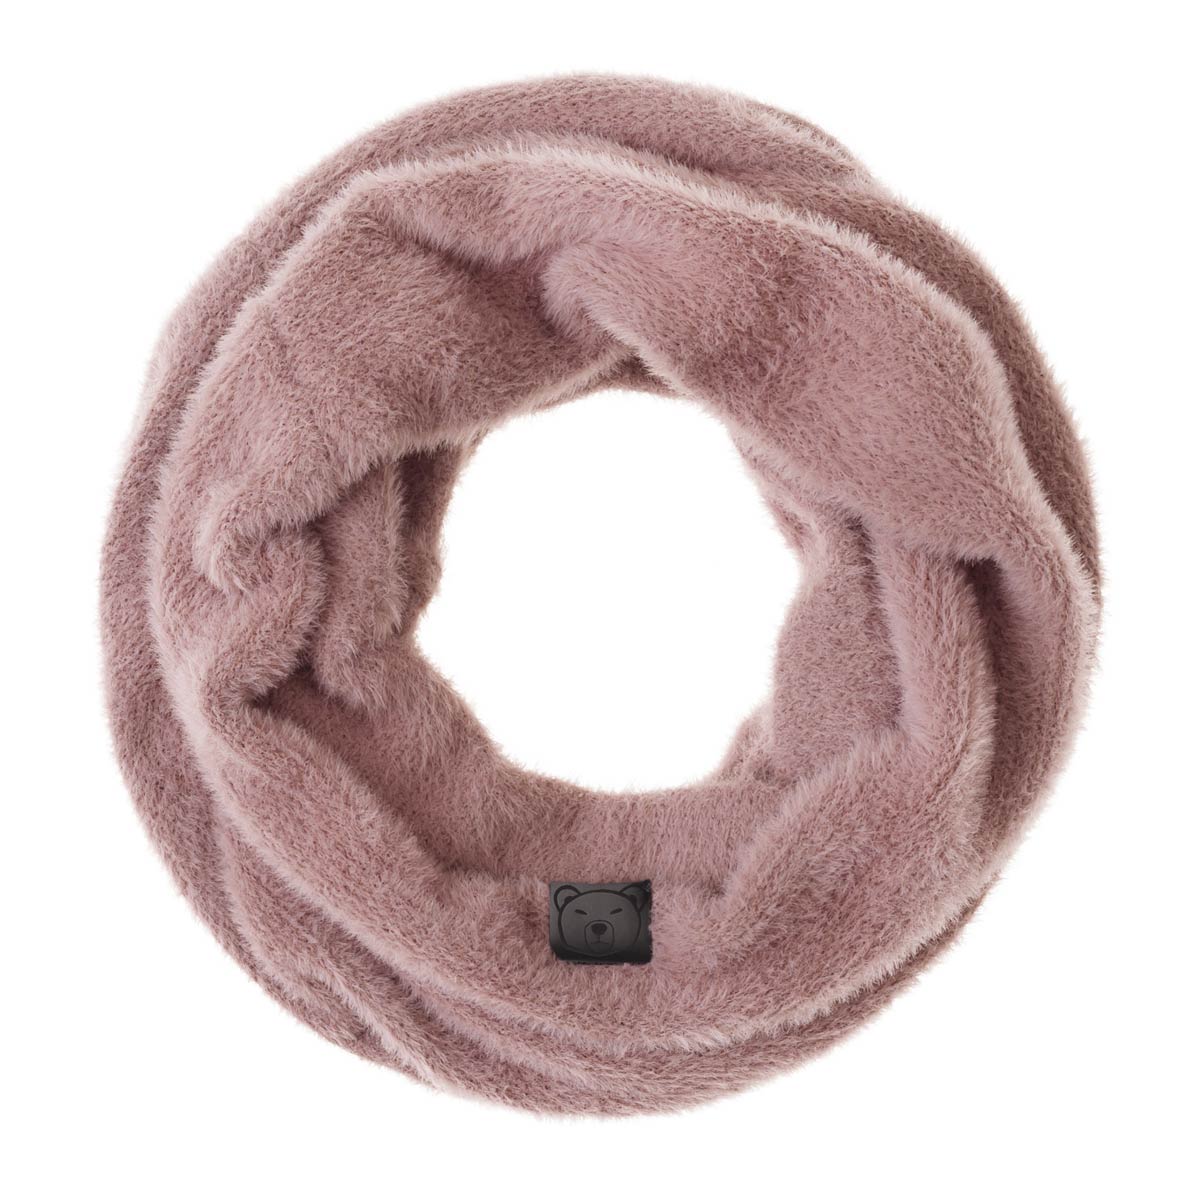 AT-06611_F12-1--_Snood-femme-rose-made-in-europe